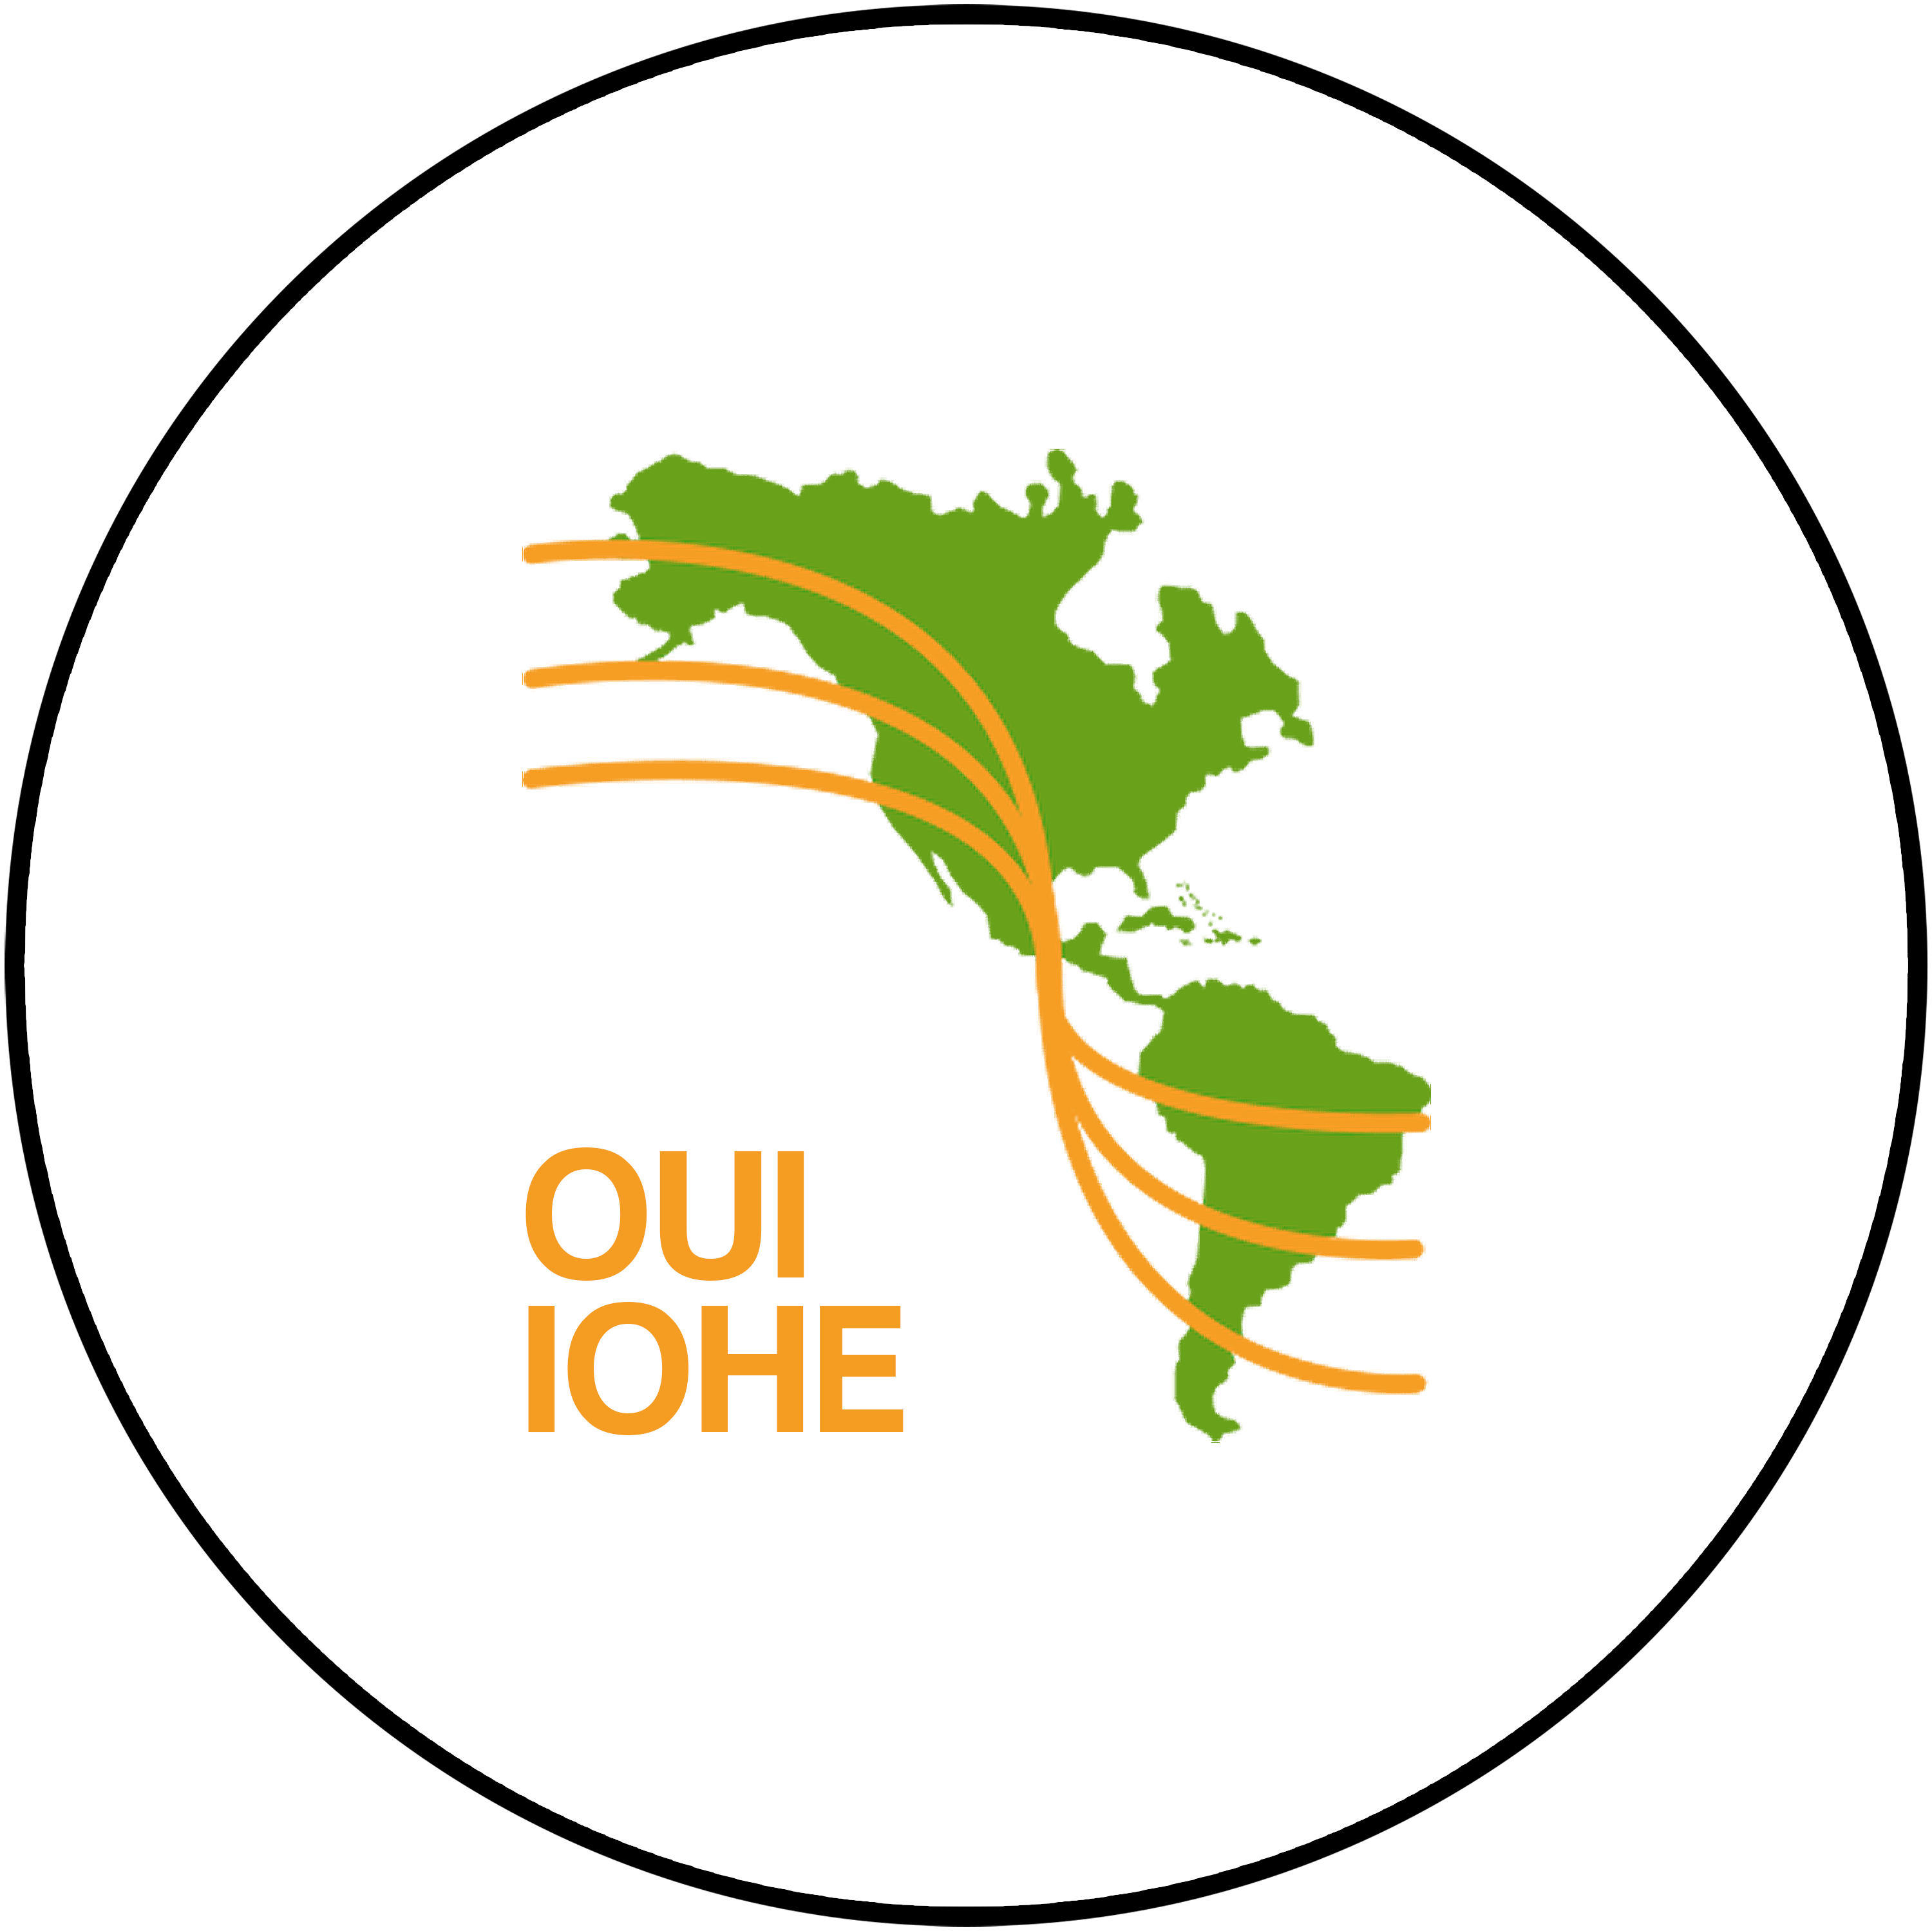 Inter-American Organization for Higher Education (IOHE) logo